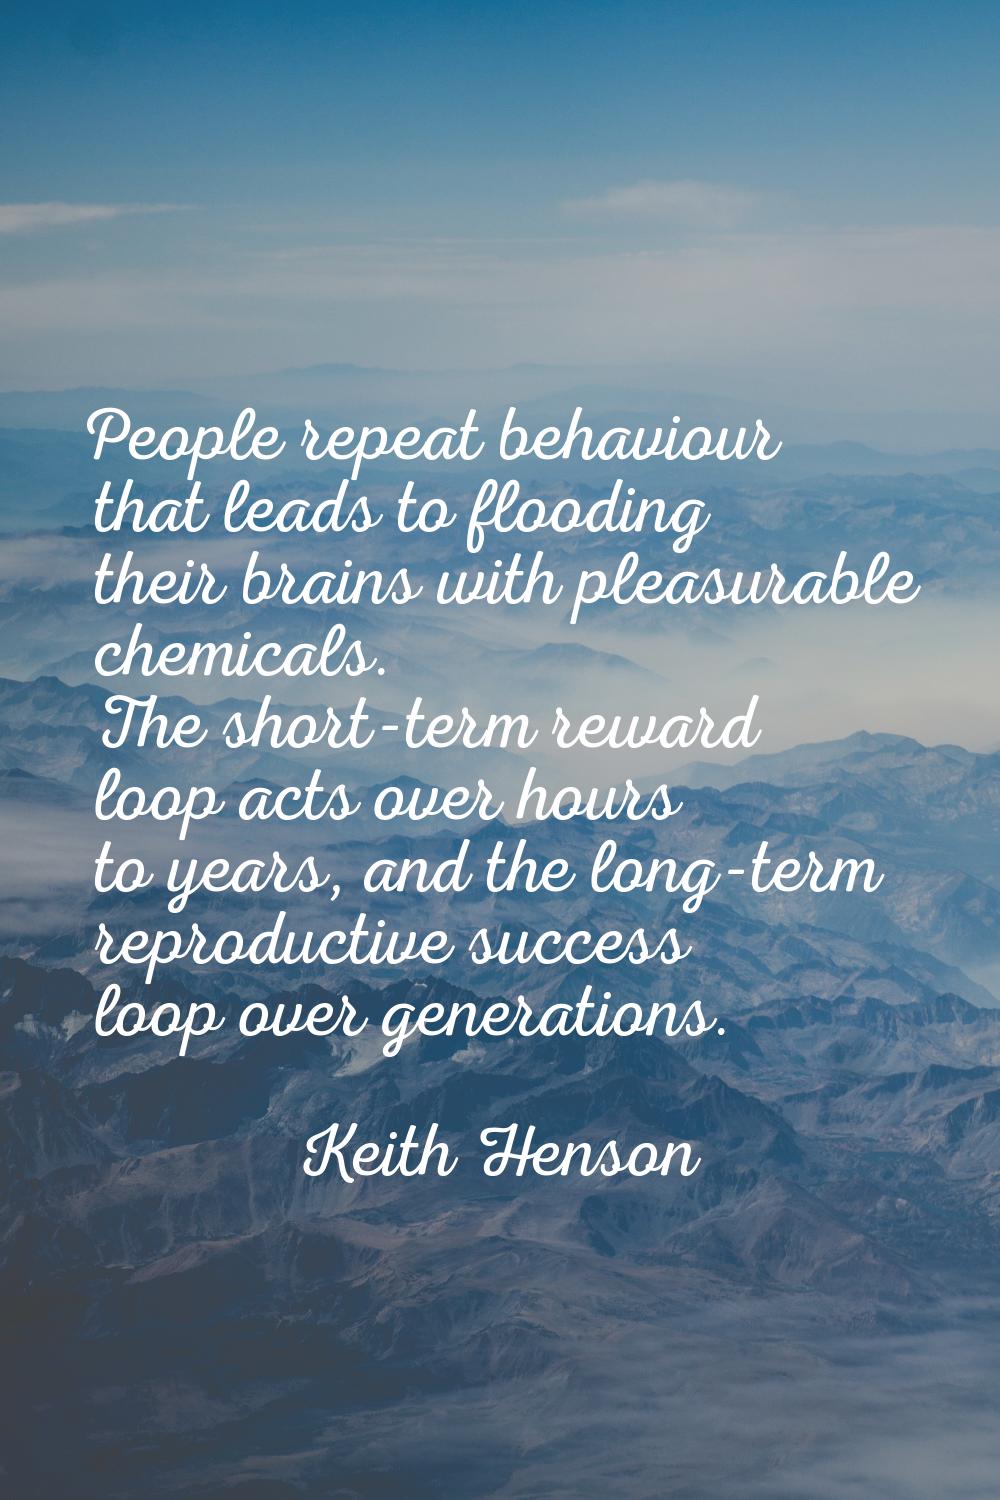 People repeat behaviour that leads to flooding their brains with pleasurable chemicals. The short-t